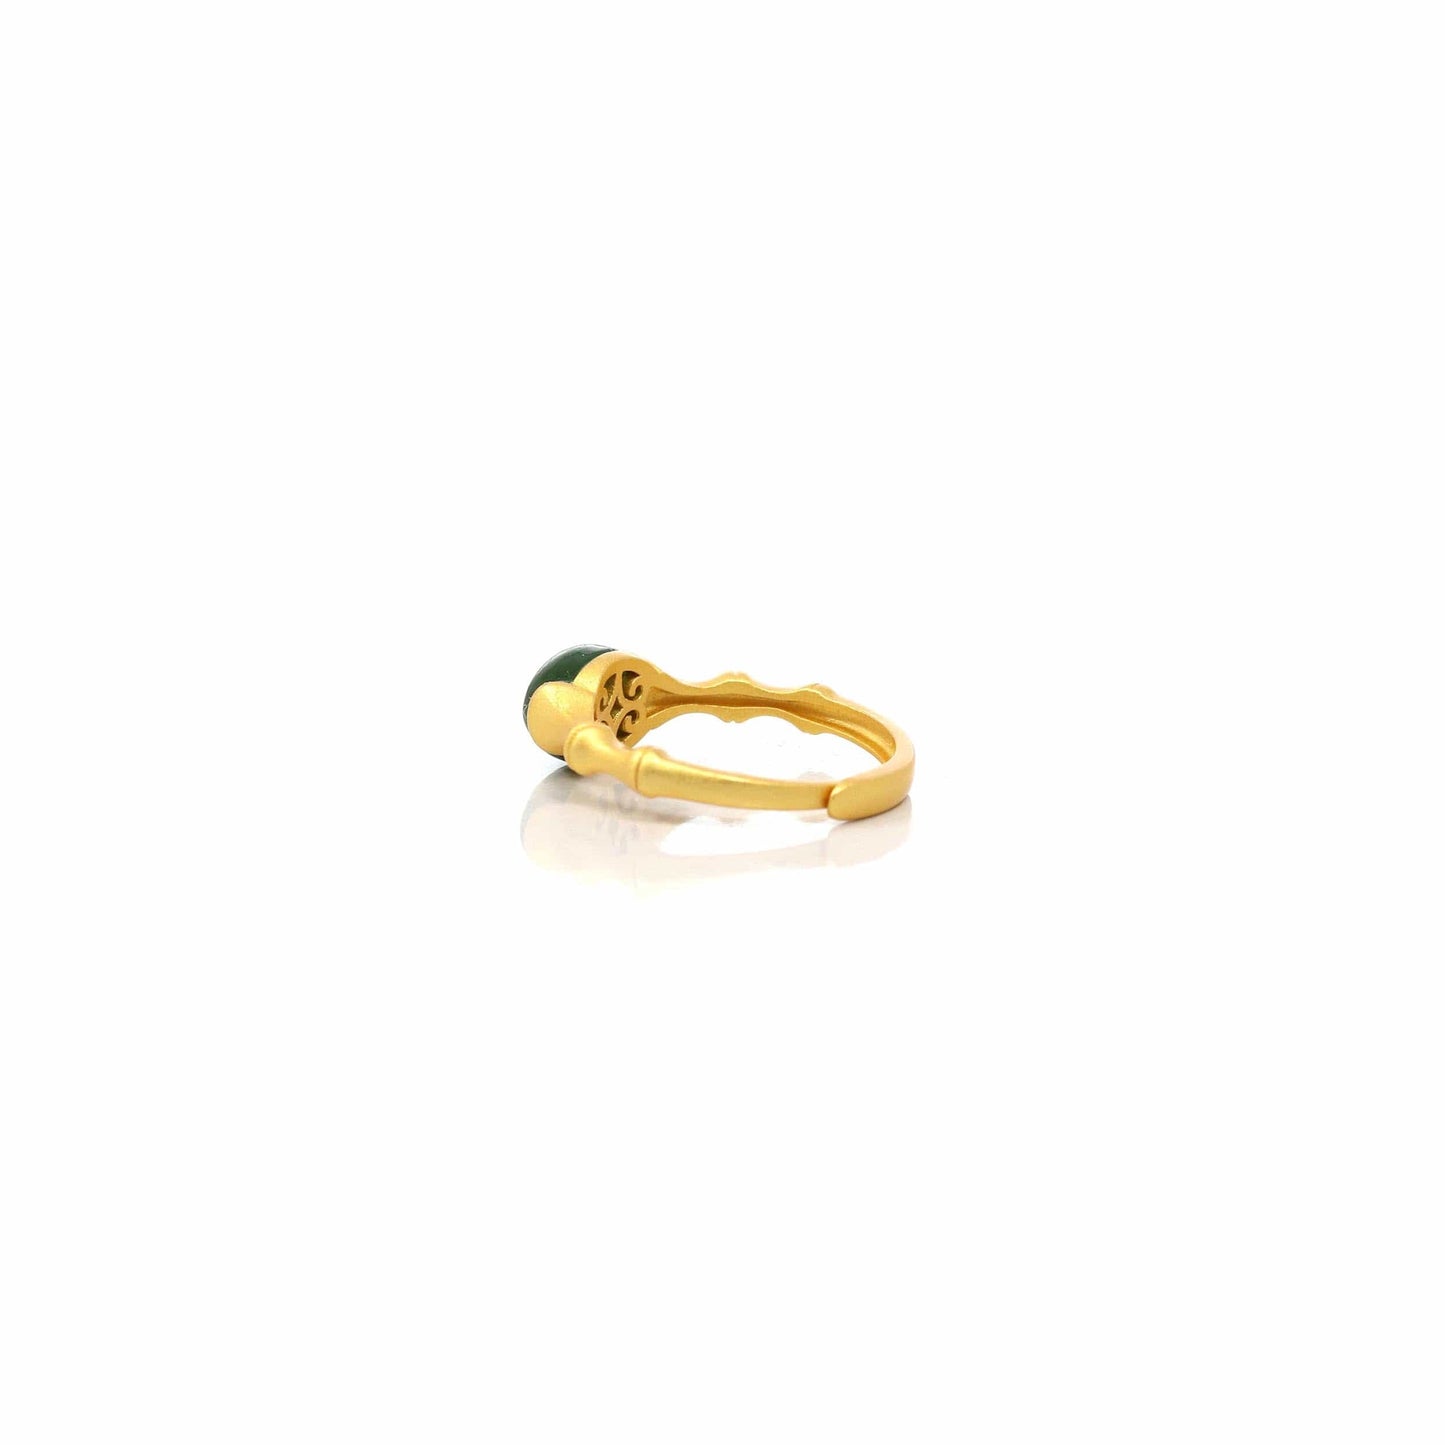 RealJade® Co. Jade Ring  RealJade® Co. "Classic Oval" Sterling Silver Real Green Nephrite Jade Bamboo Ring For Her